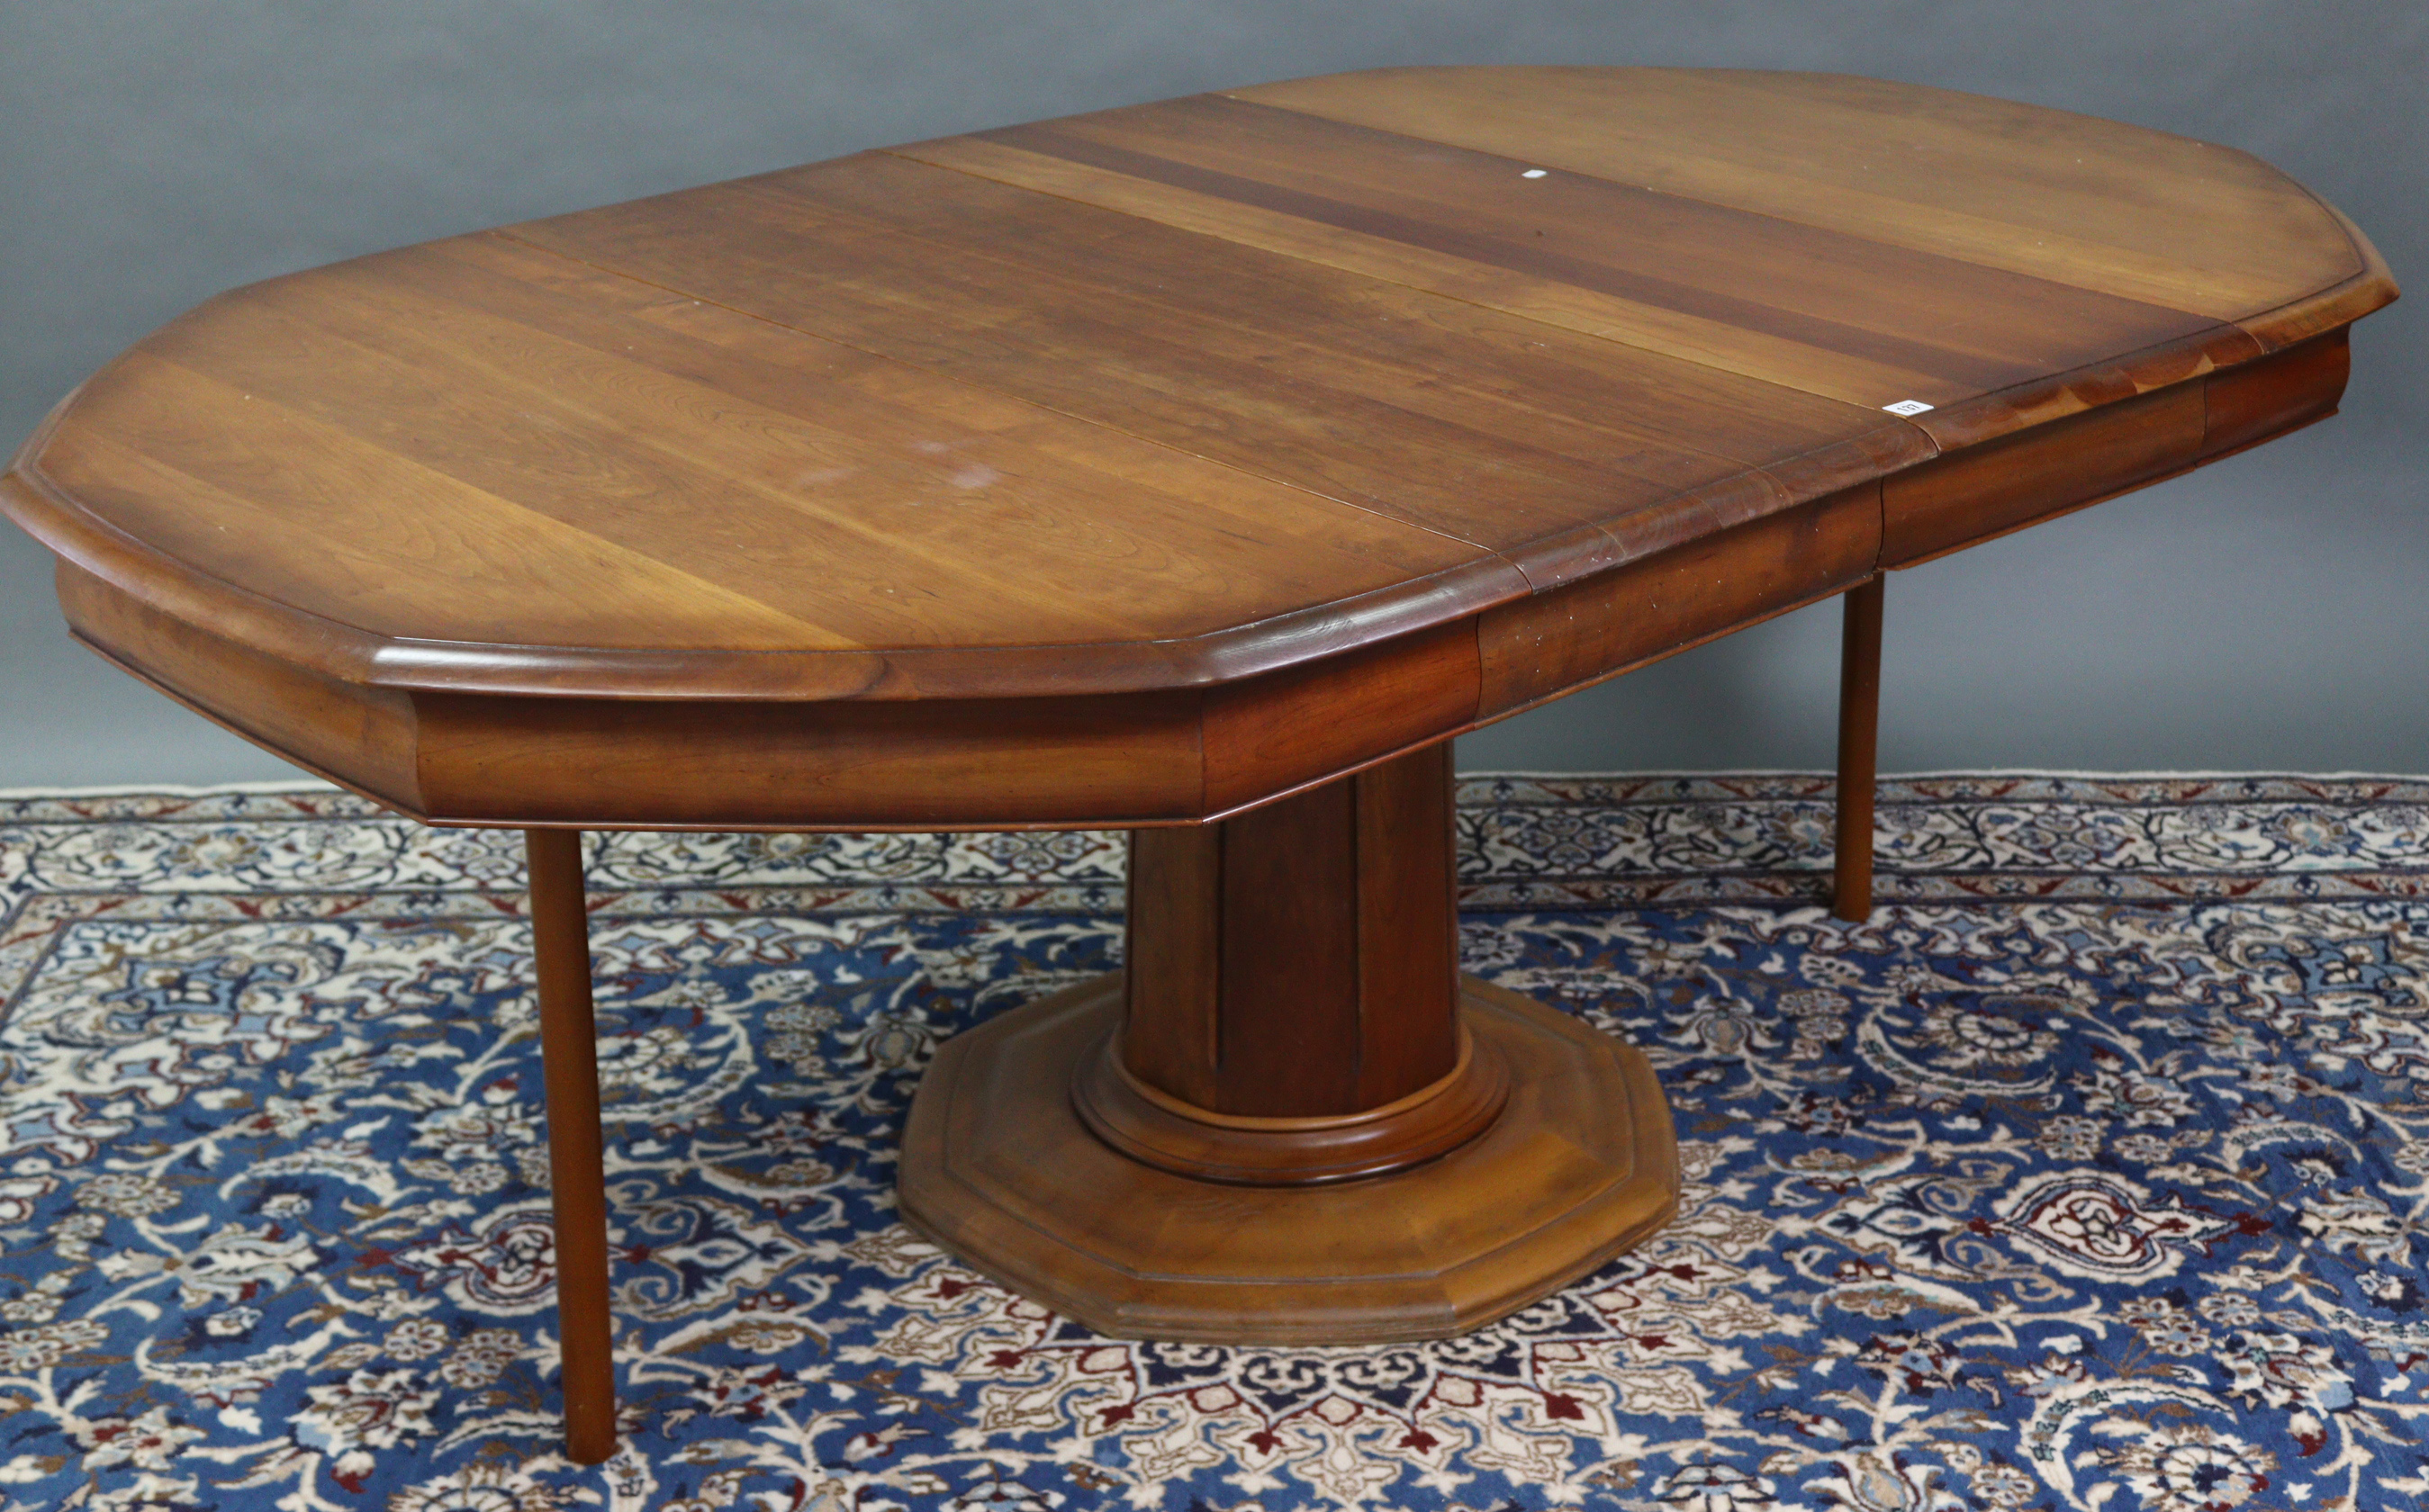 An “ESIGENCE” (Made in France) cherry wood octagonal extending dining table with two additional - Image 3 of 4